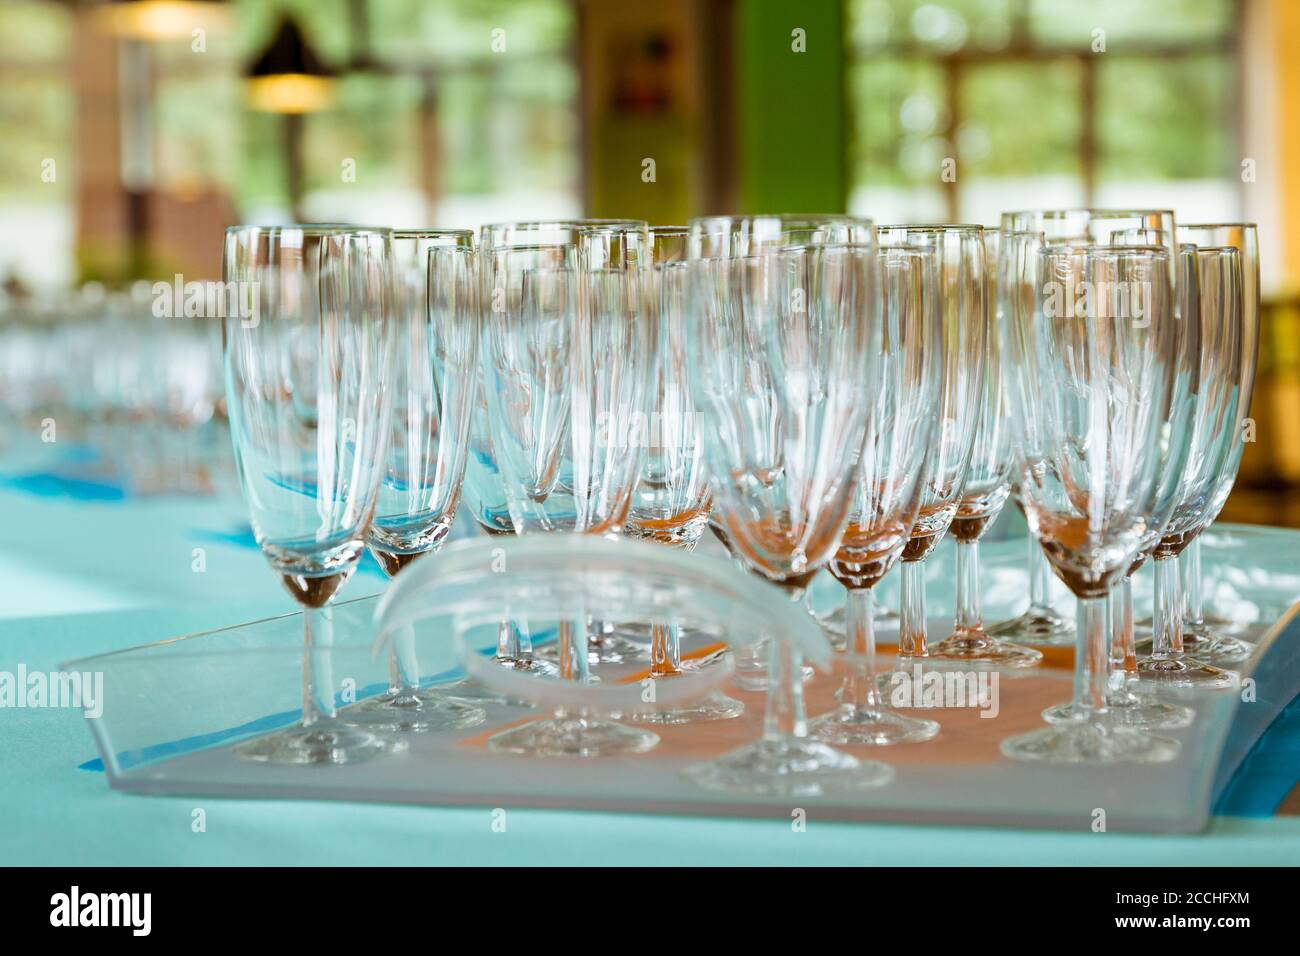 Tray with empty champagne glasses ready to be filled when the party starts Stock Photo